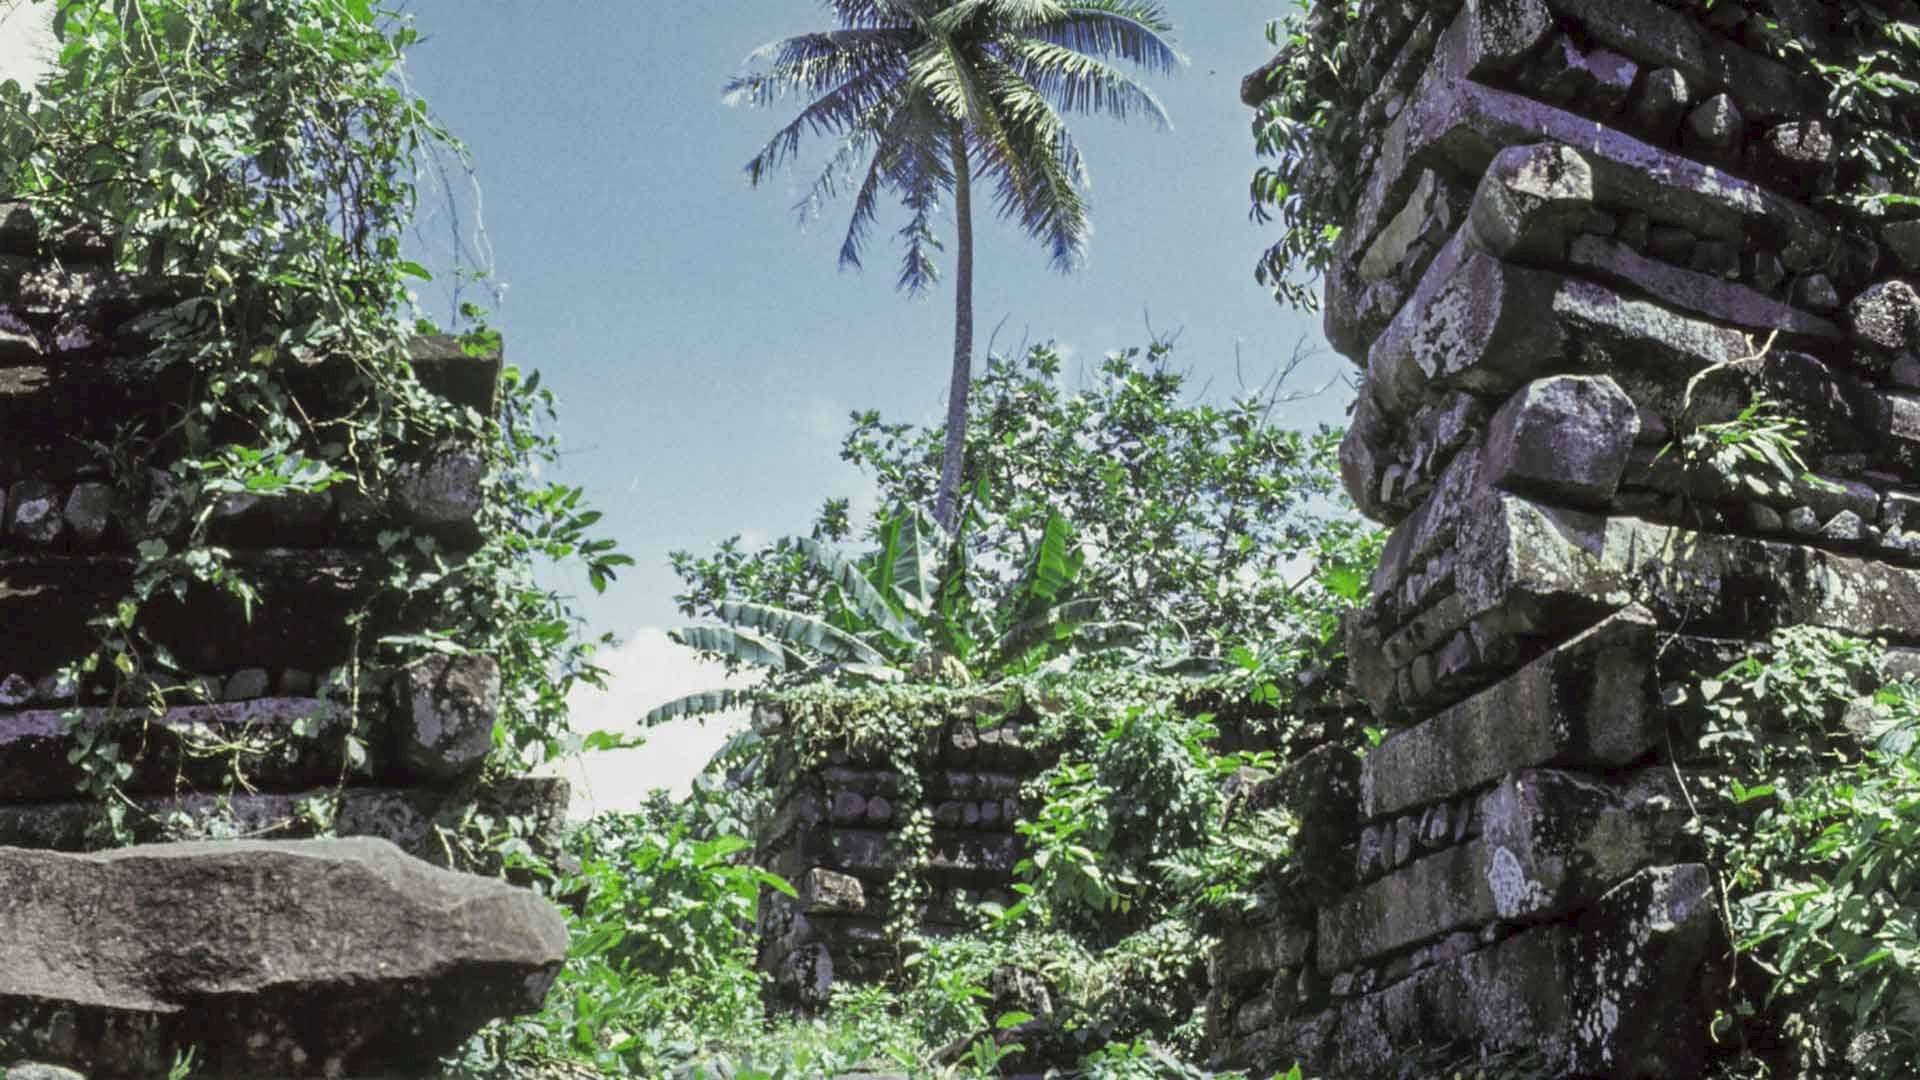 Are there tunnels under Nan Madol?